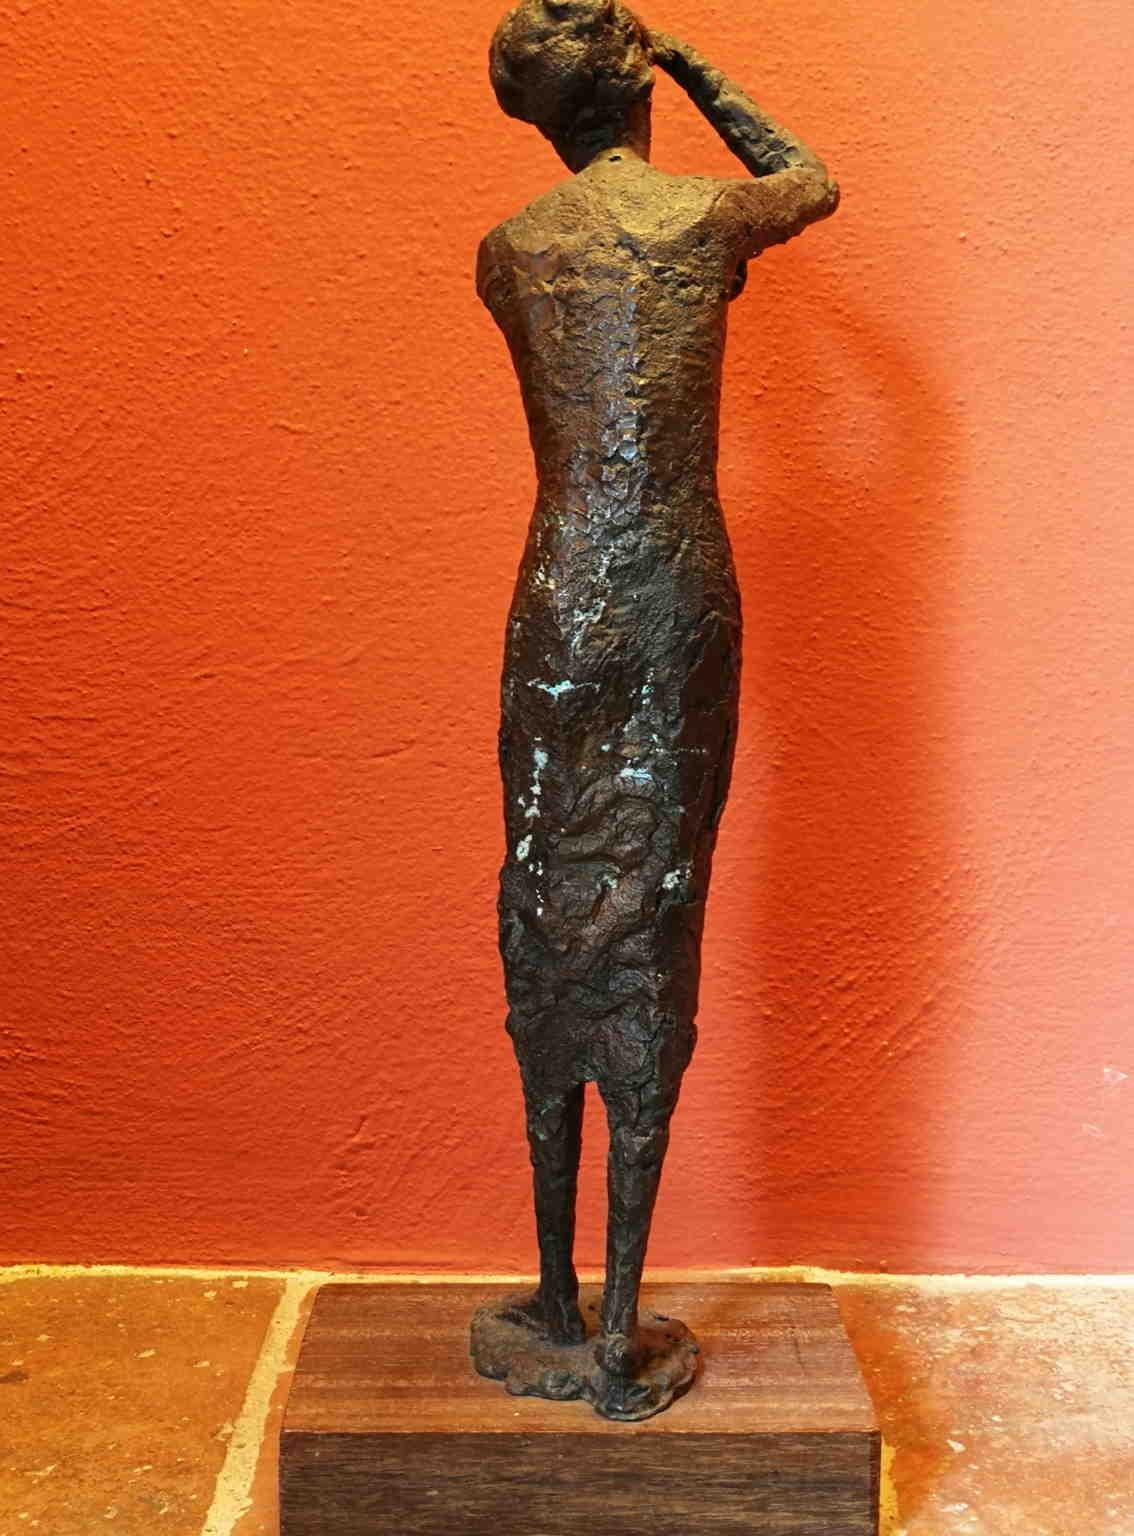 Tuscan Florentine Figurative Abstract Female Bronze Statue 20th century  For Sale 3